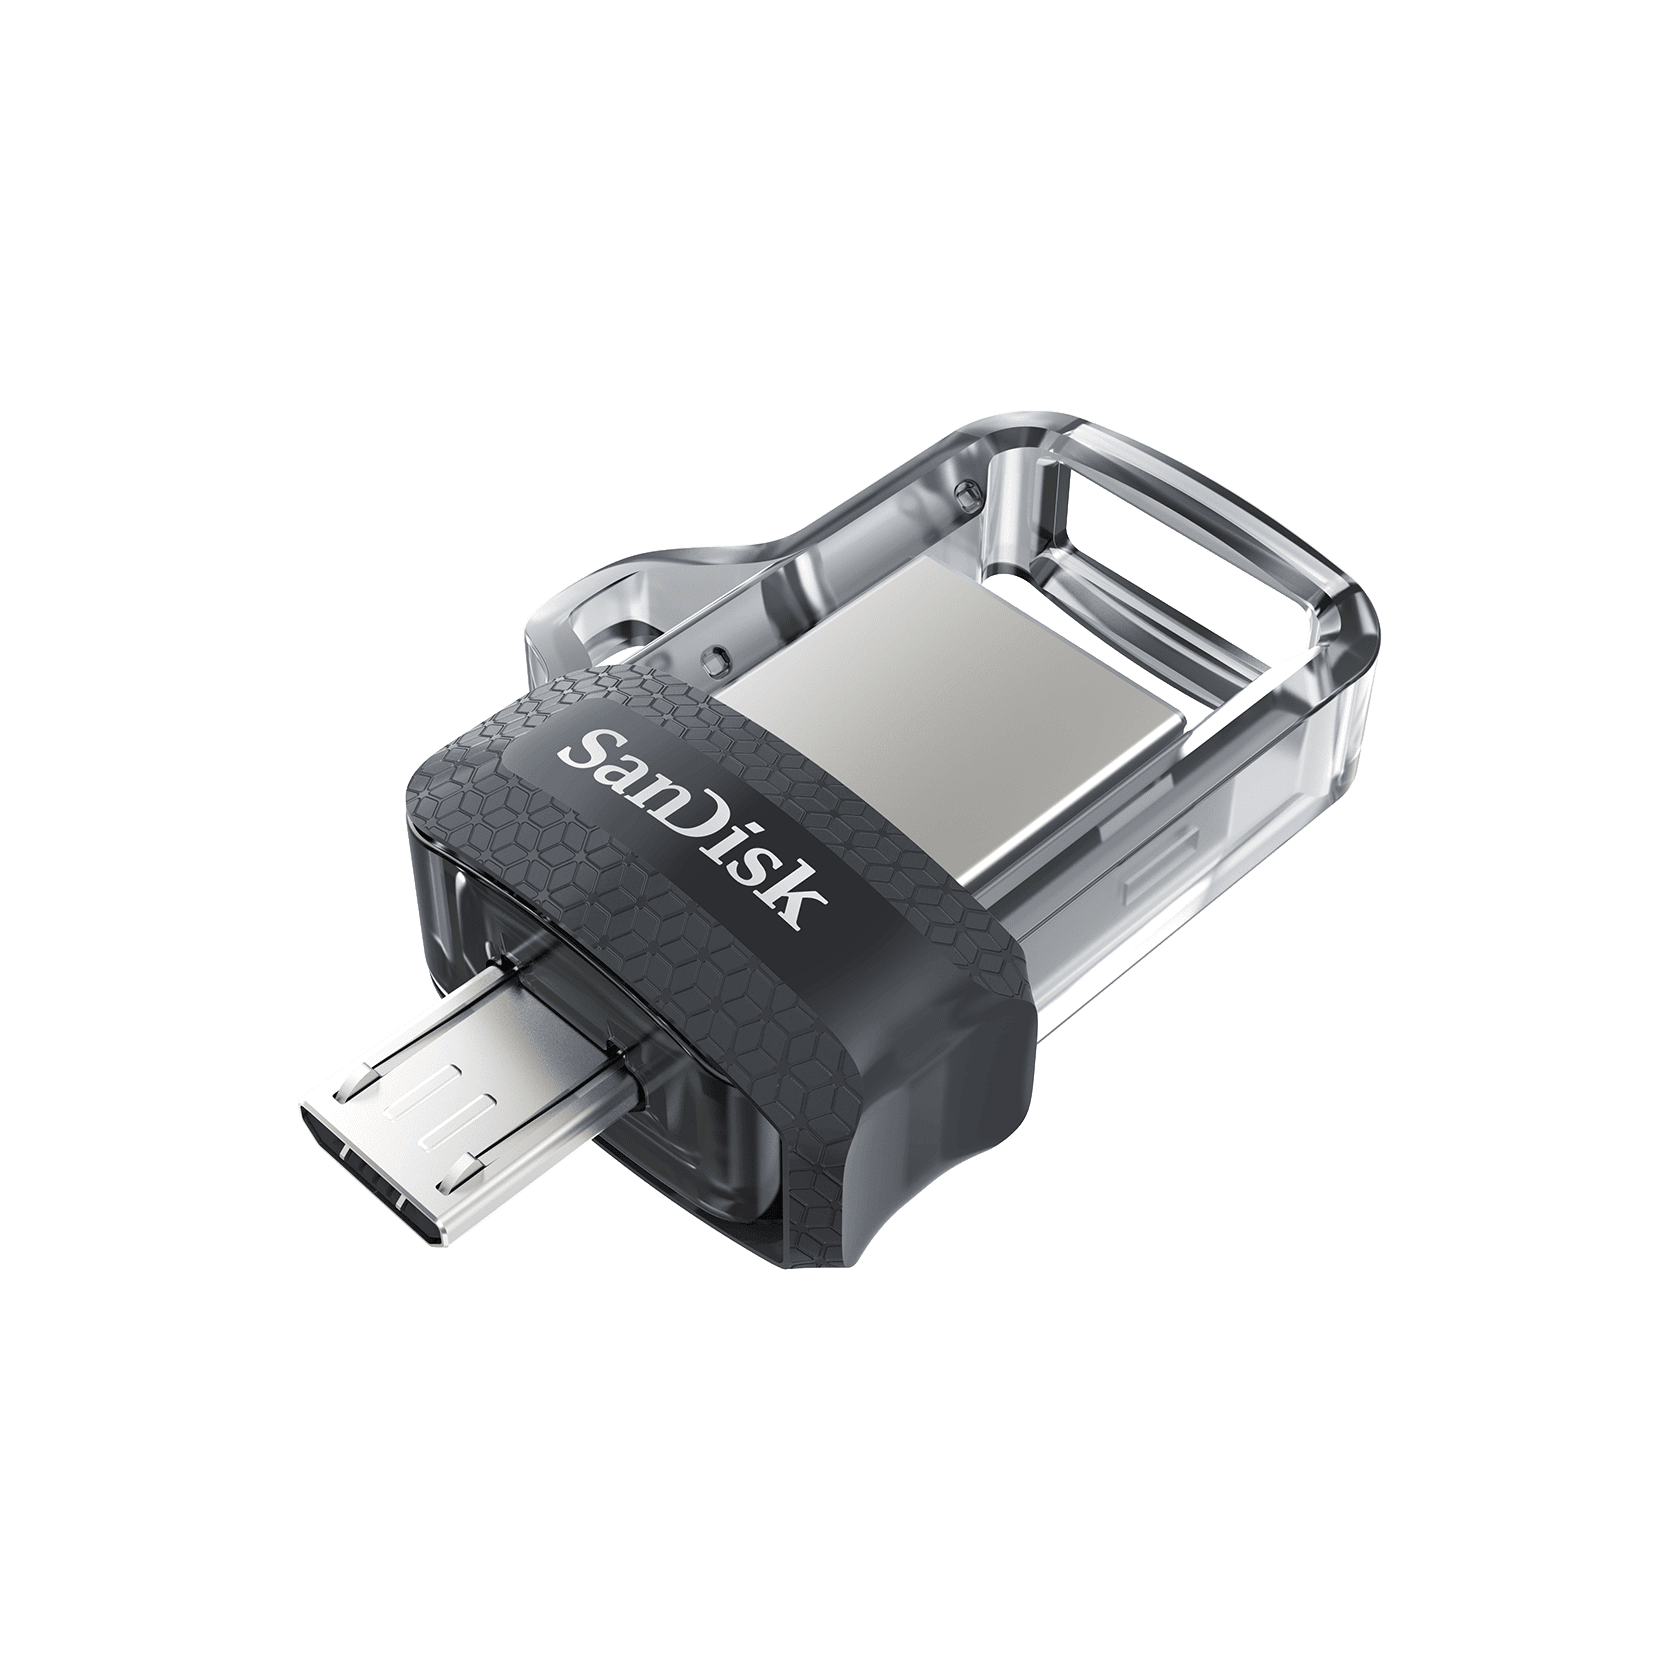 Picture of SanDisk SDDD3-064G-A46 64GB USB 3.0 AM Ultra Dual Flash Drive